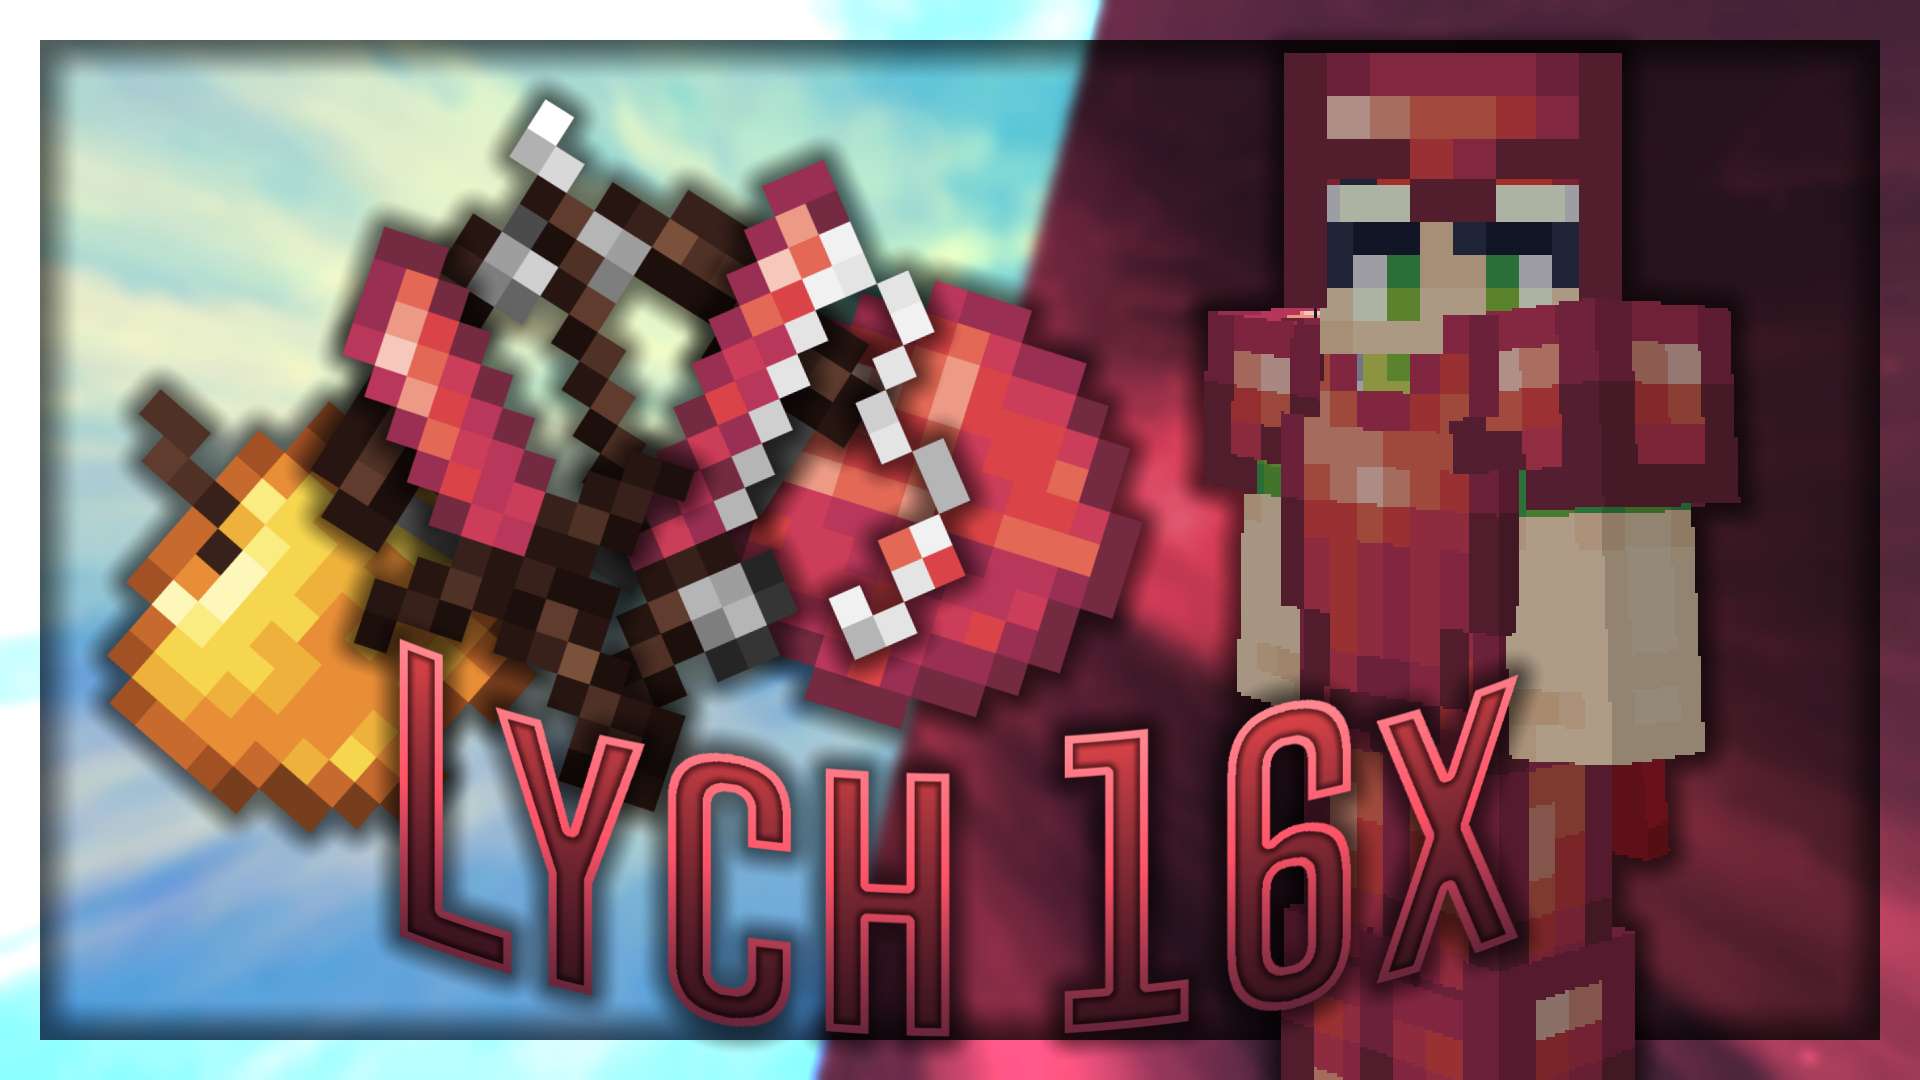 Lych 16x by Mek on PvPRP